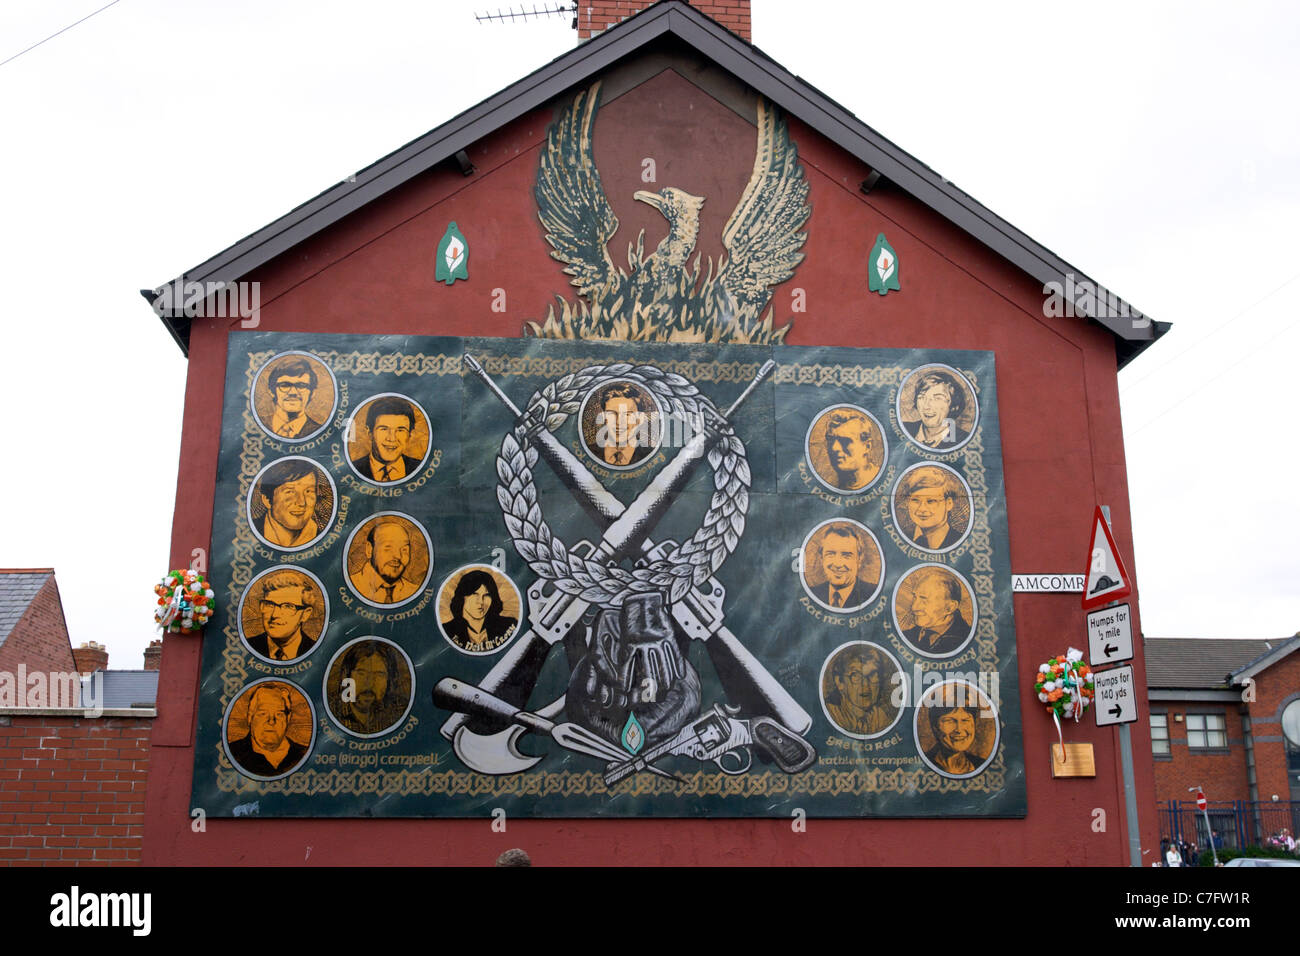 republican wall to dead ira volunteers featuring phoenix and crossed rifles mural painting west belfast northern ireland Stock Photo